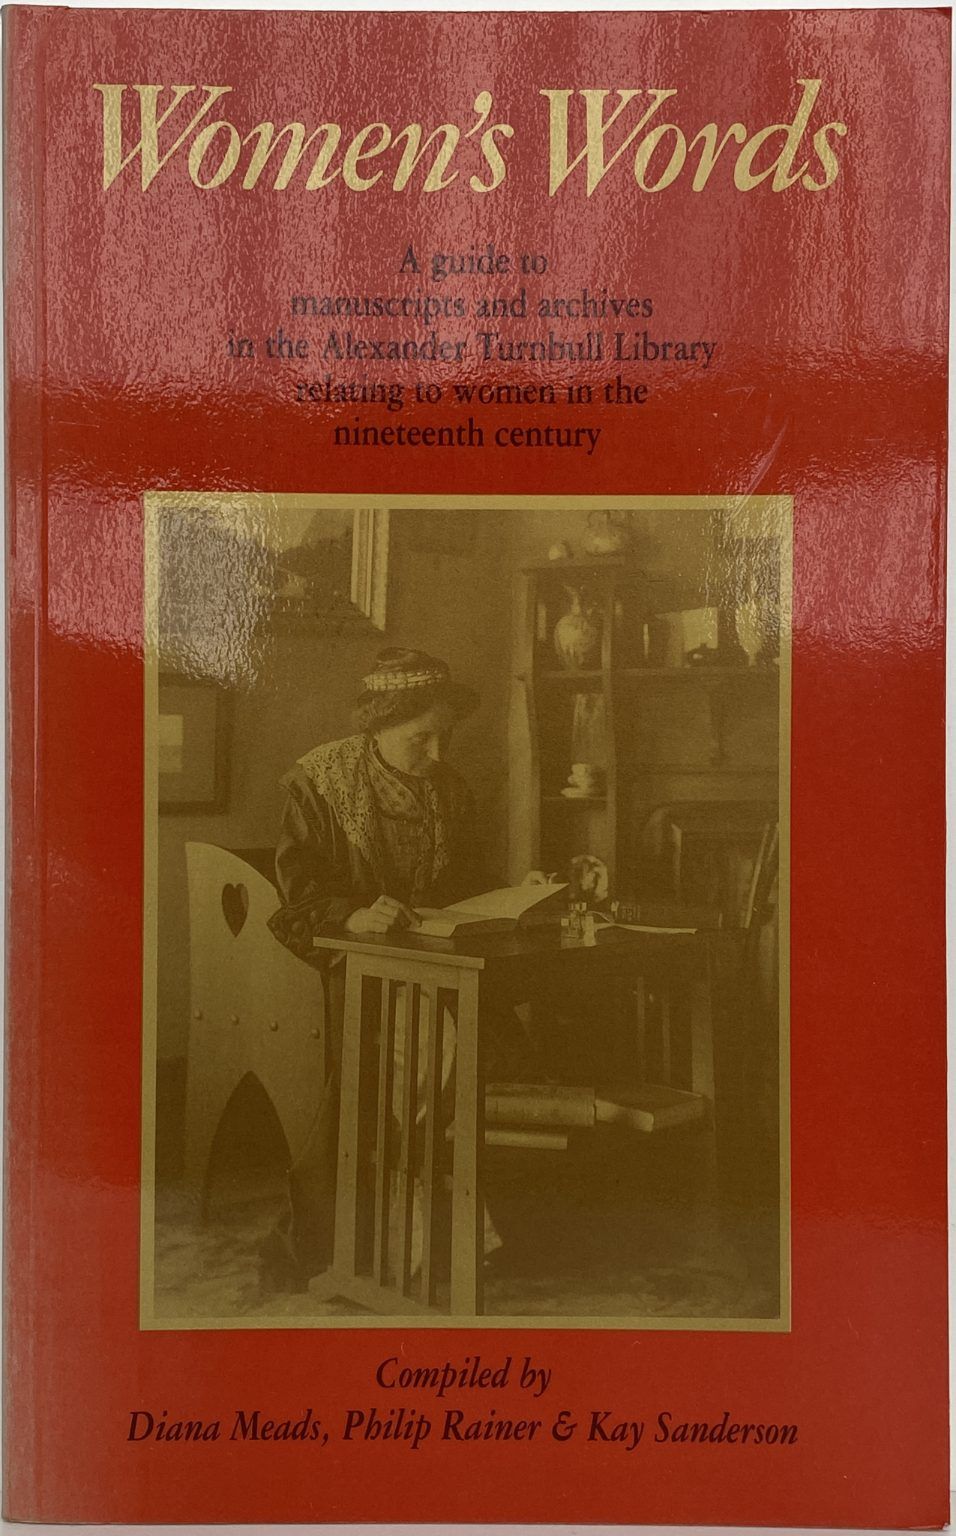 WOMEN'S WORDS: Guide to Manuscripts & Archives in the Alexander Turnbull Library